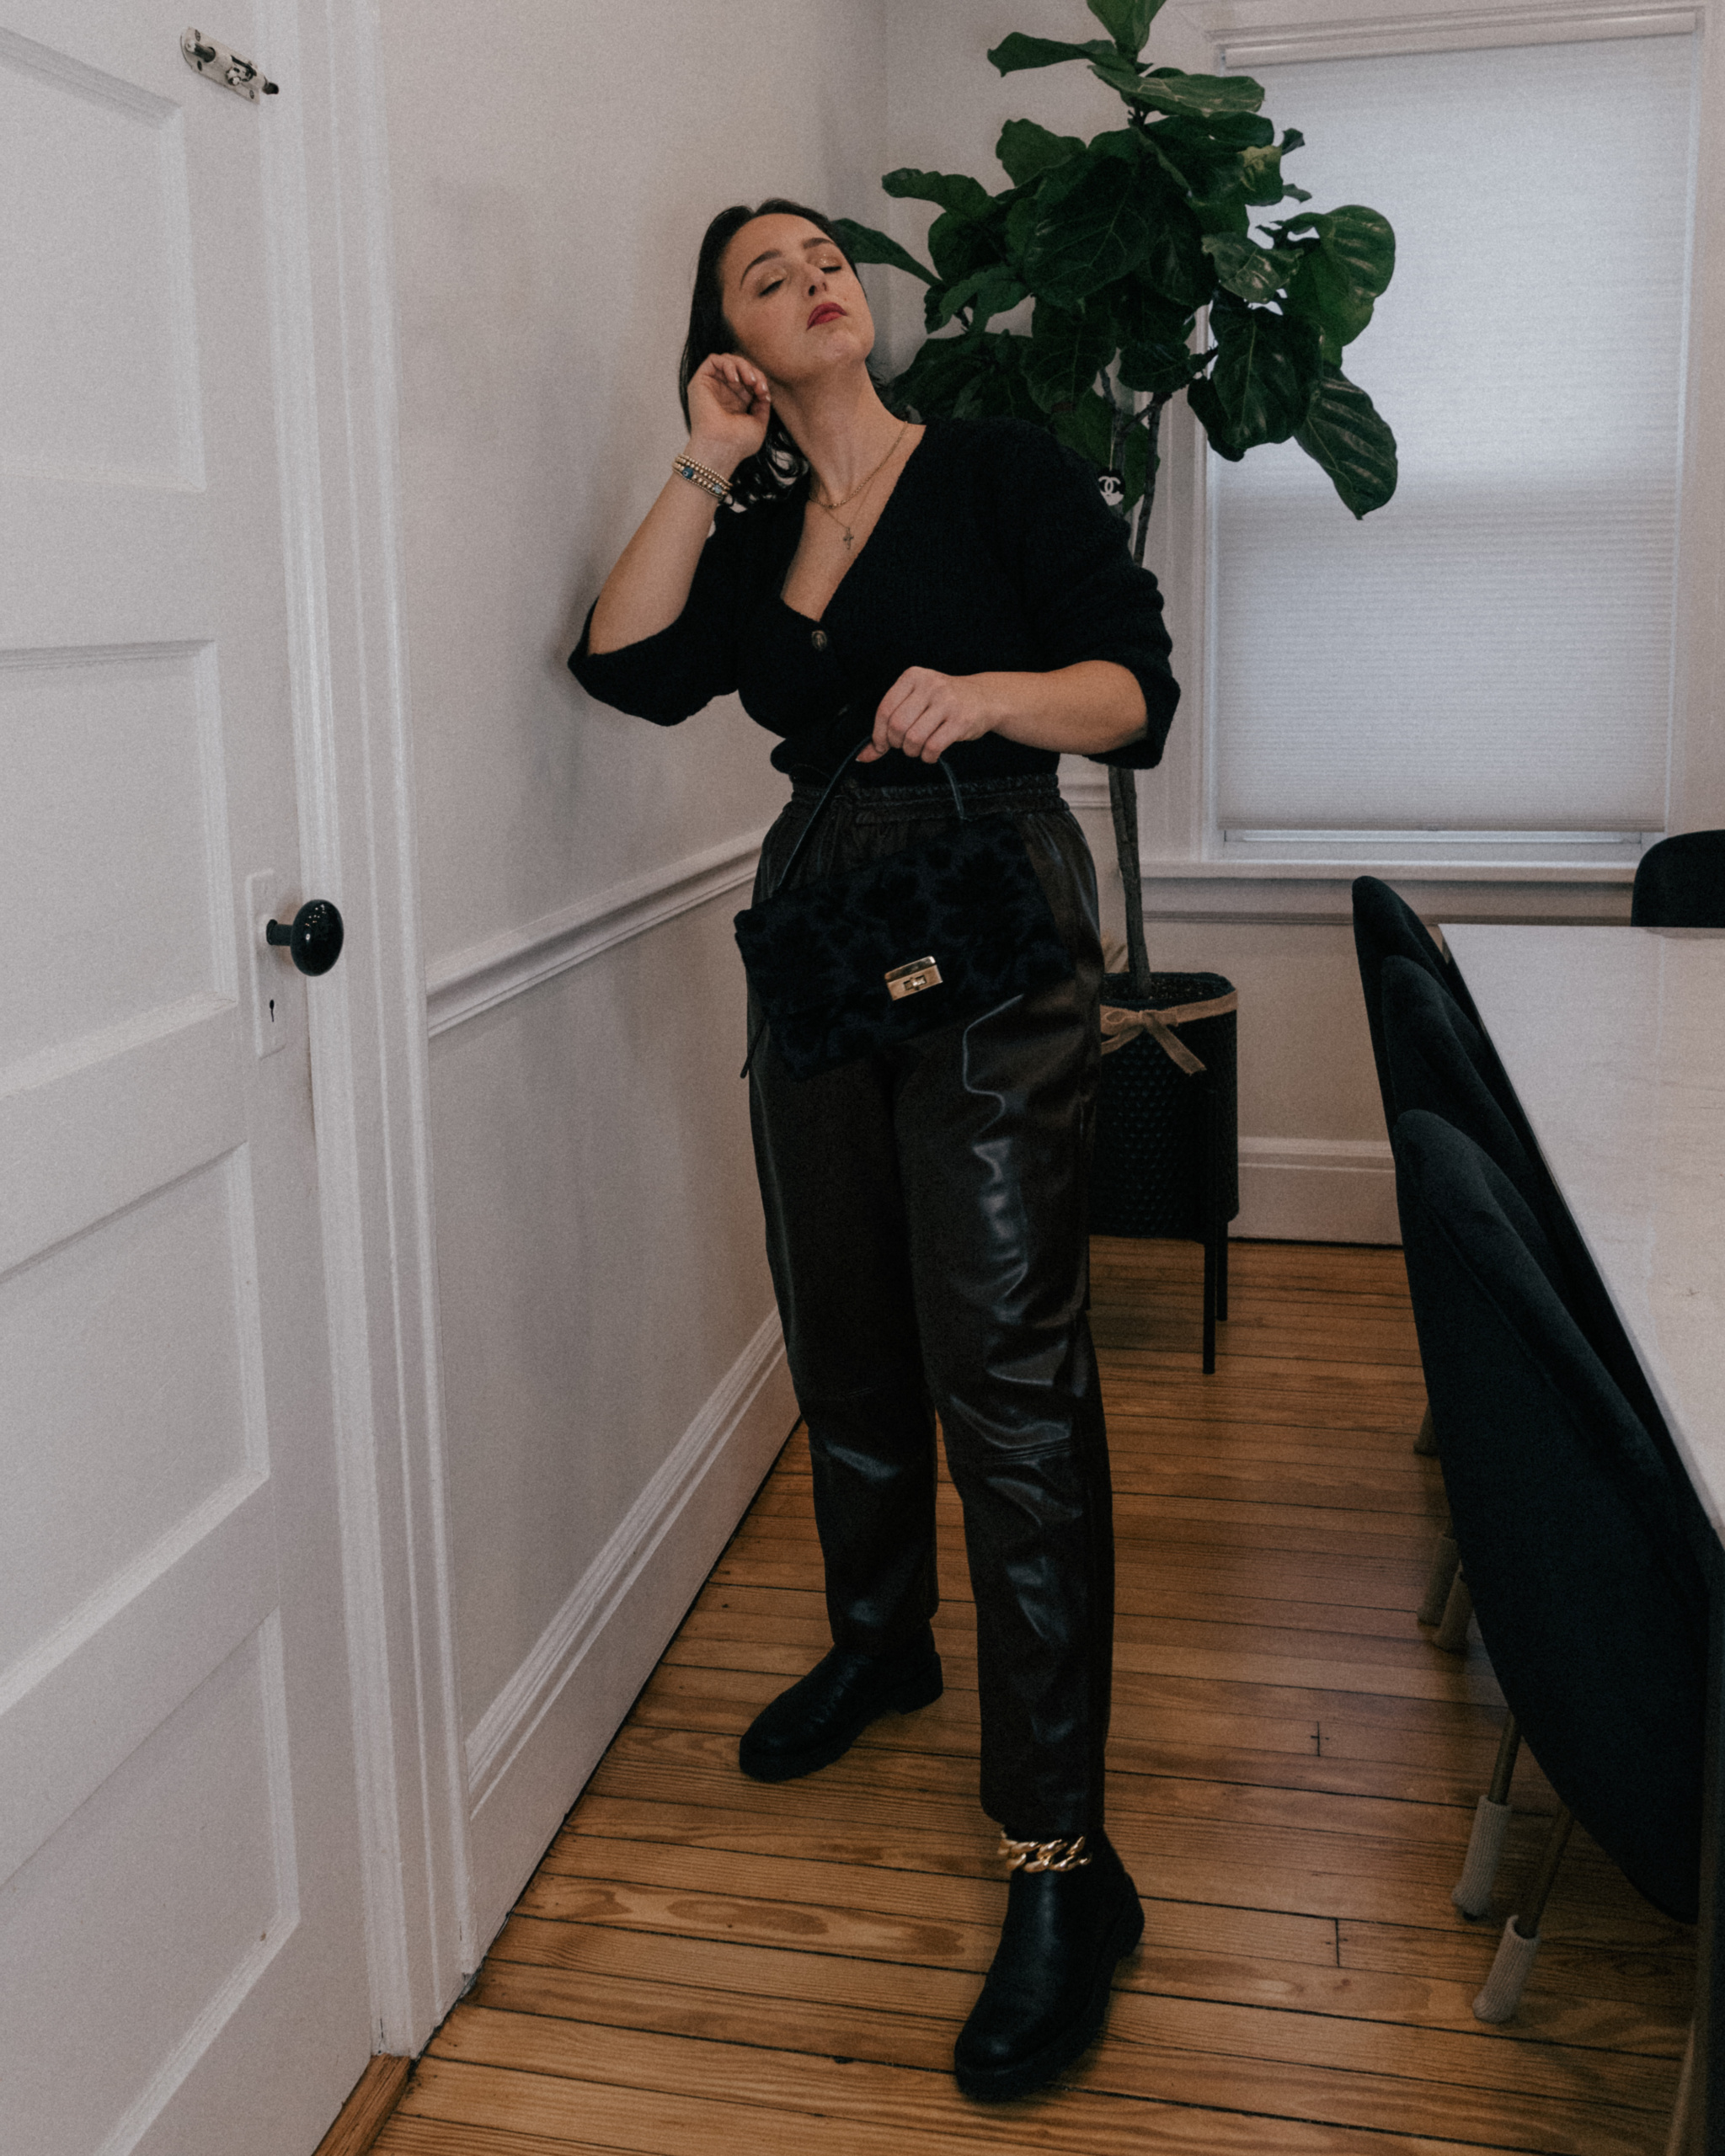 Winter Outfit Ideas - Items to Grab for Cool Casual Style - Leather Pants - Simply by Simone - #winteroutfit #winteroutfitideas #outfitideas #casualstyle